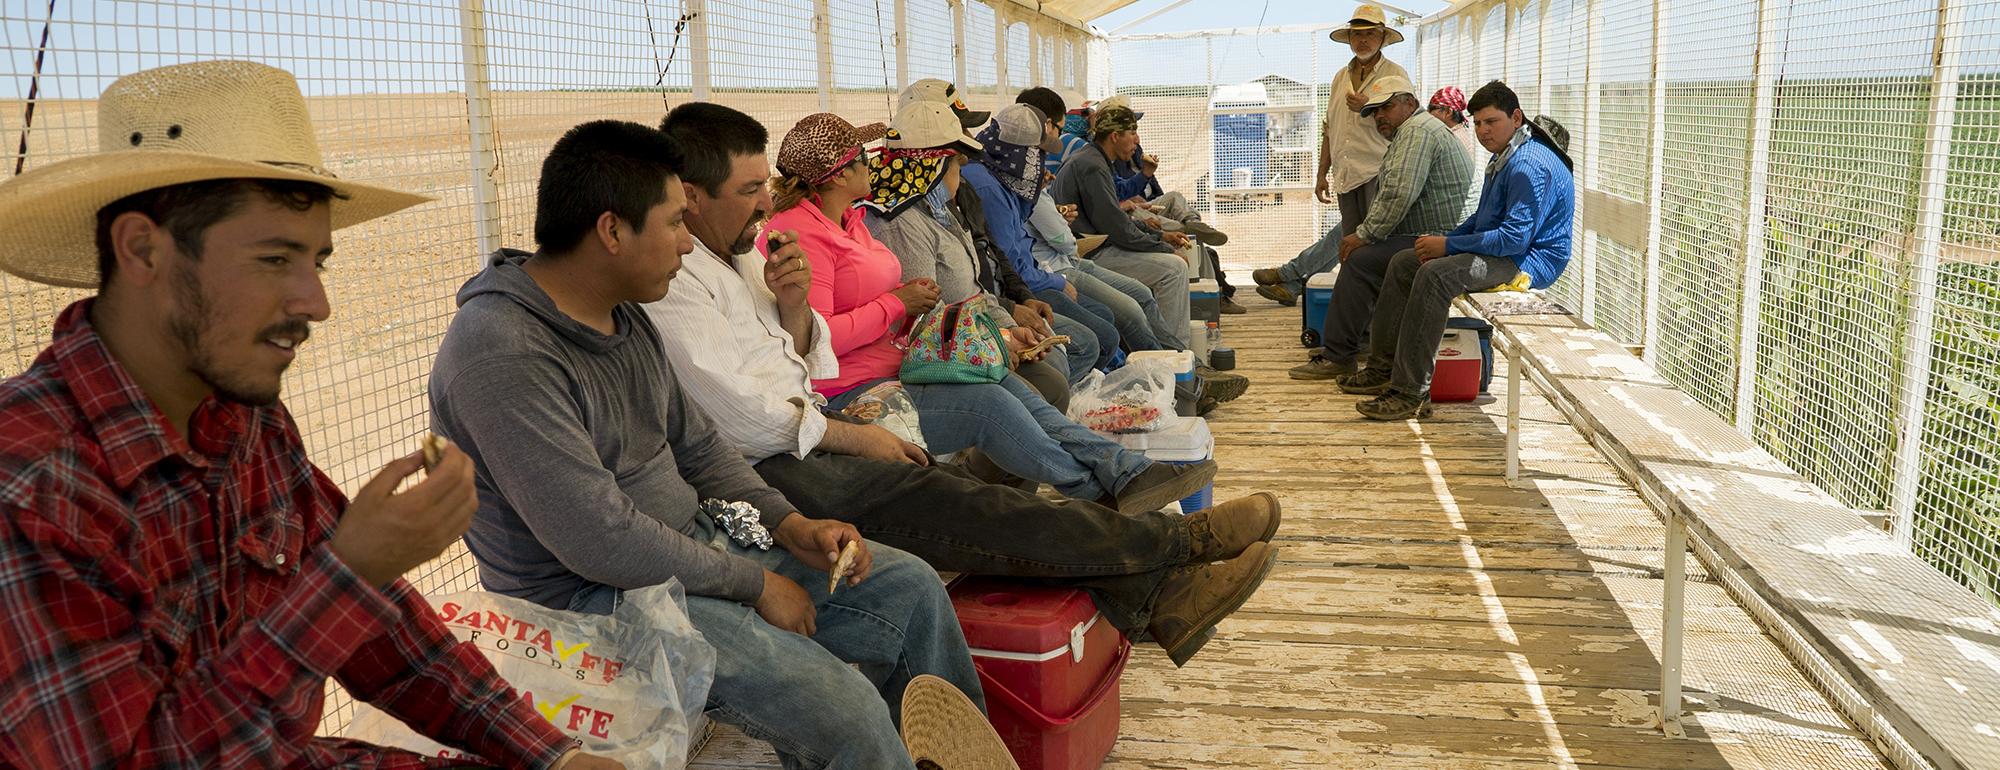 Farmworkers rest in a shade structure